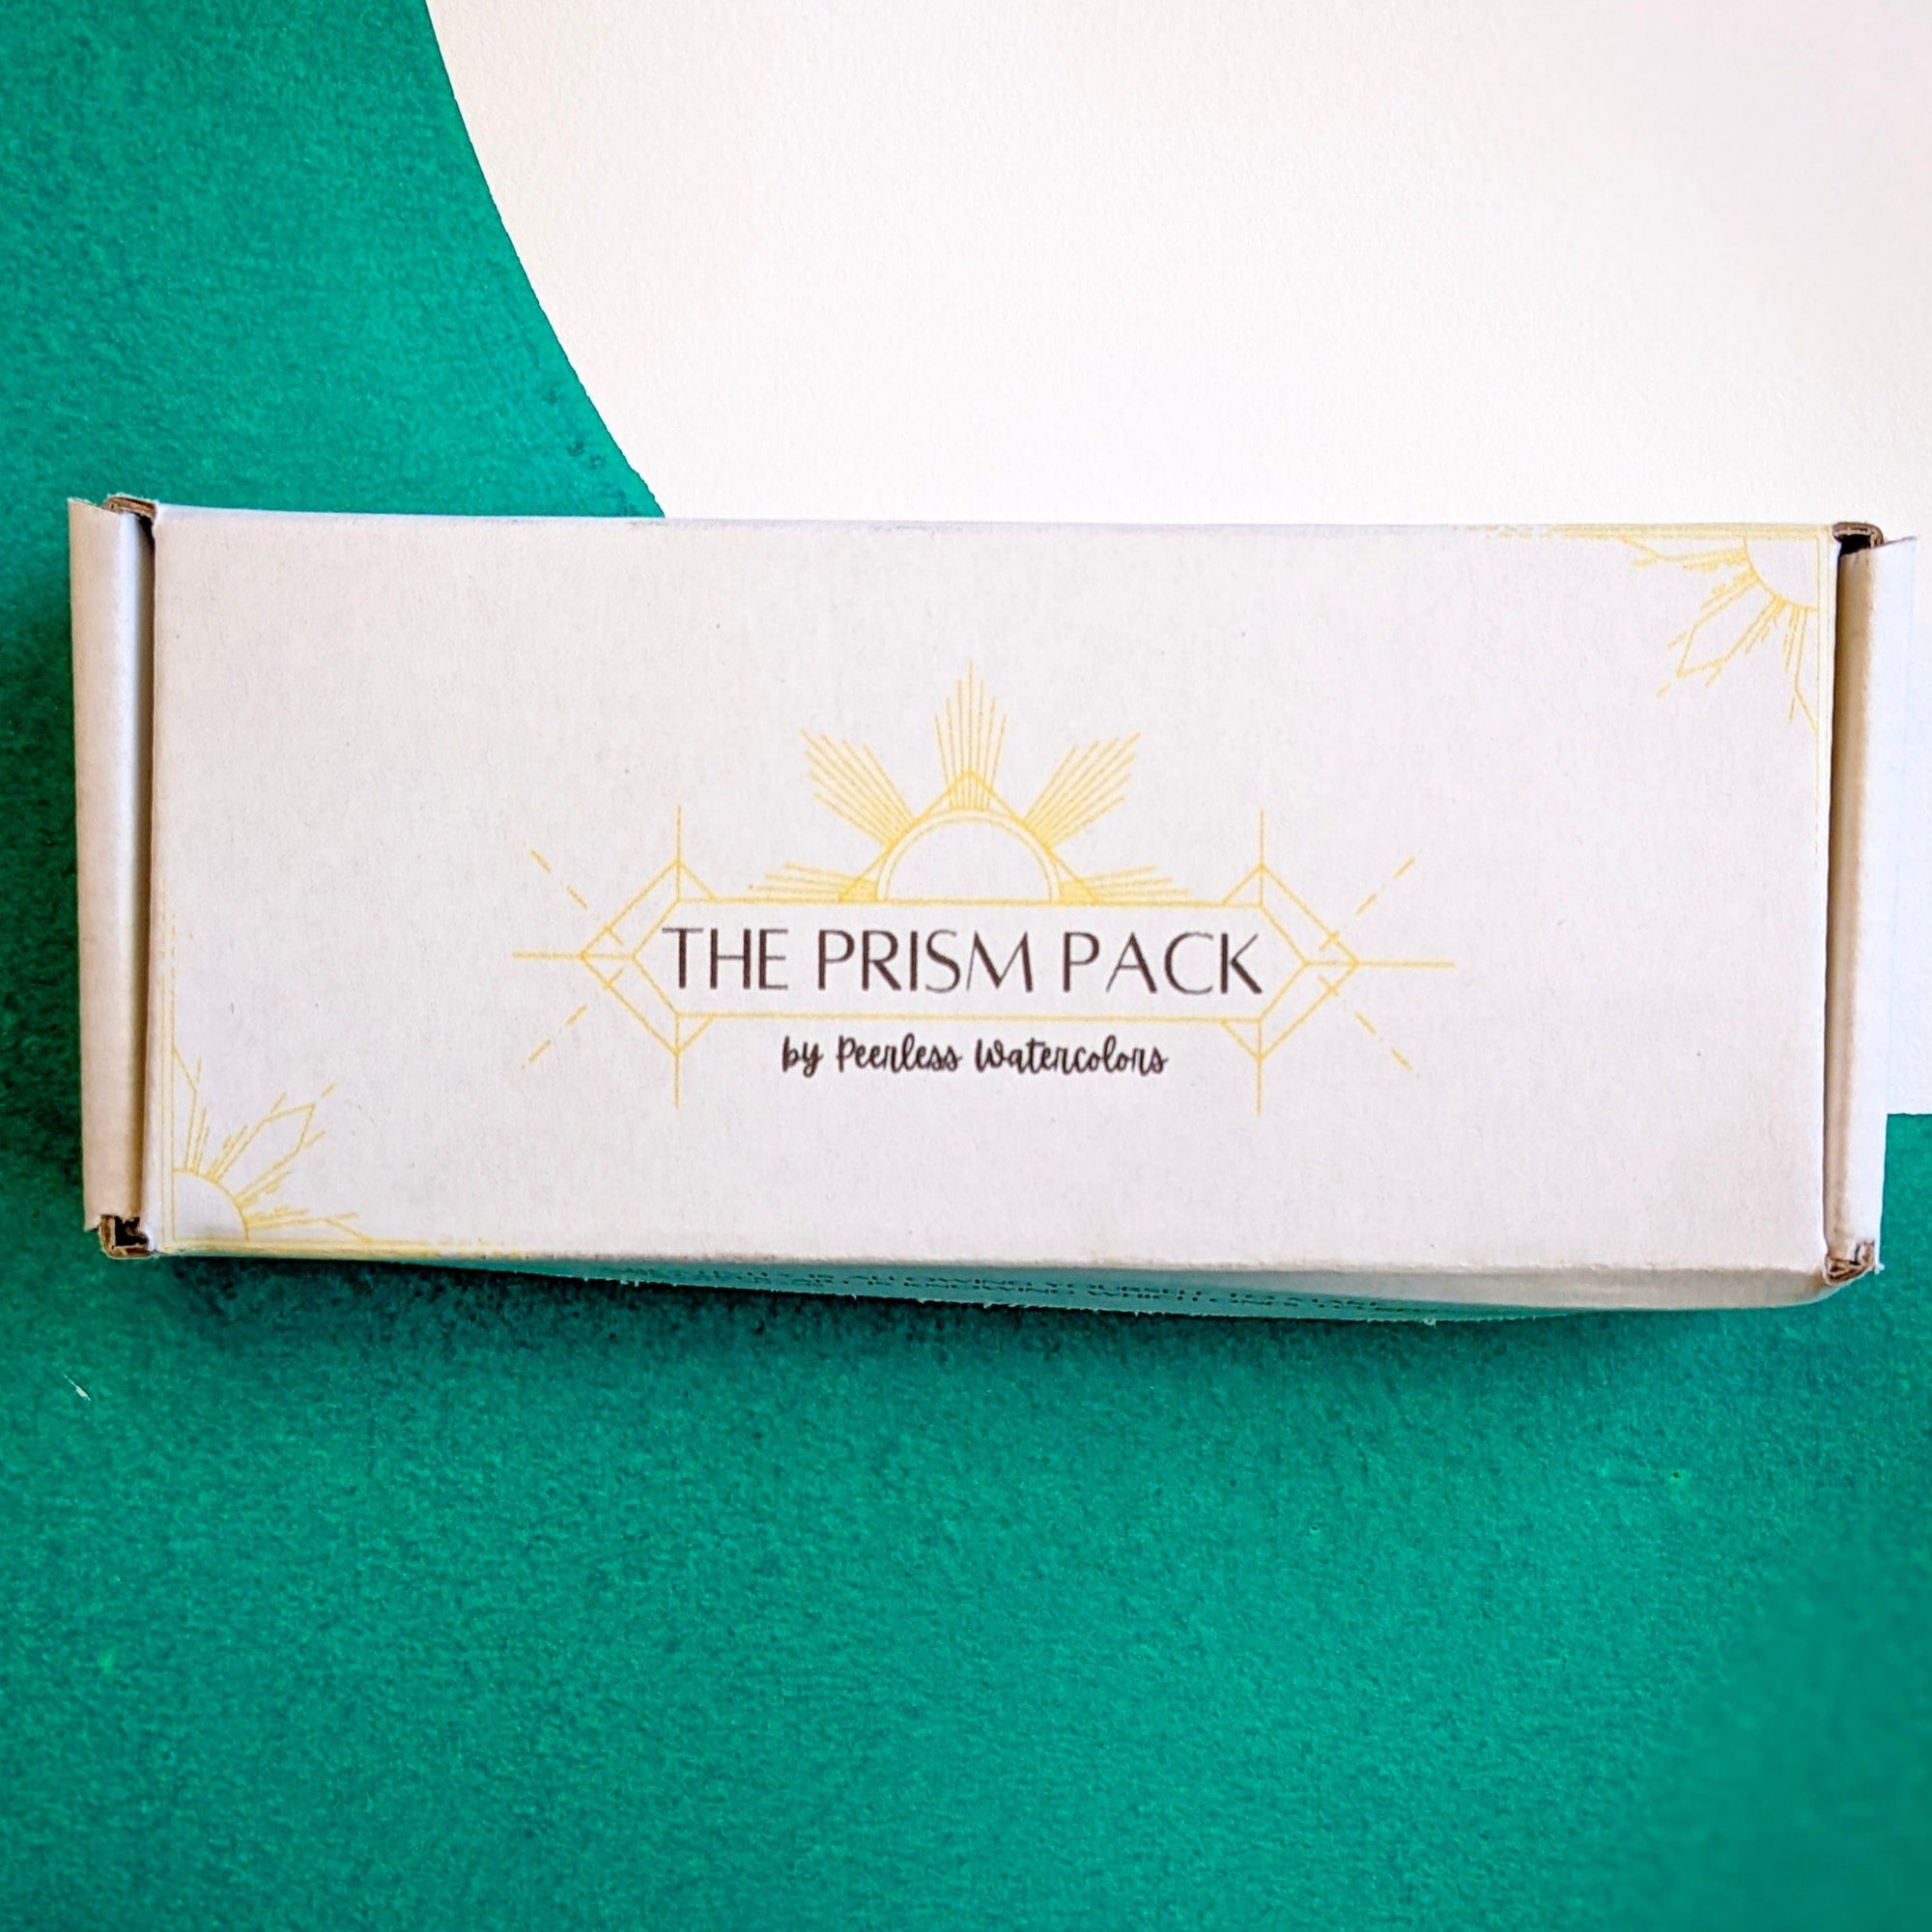 The Prism Pack